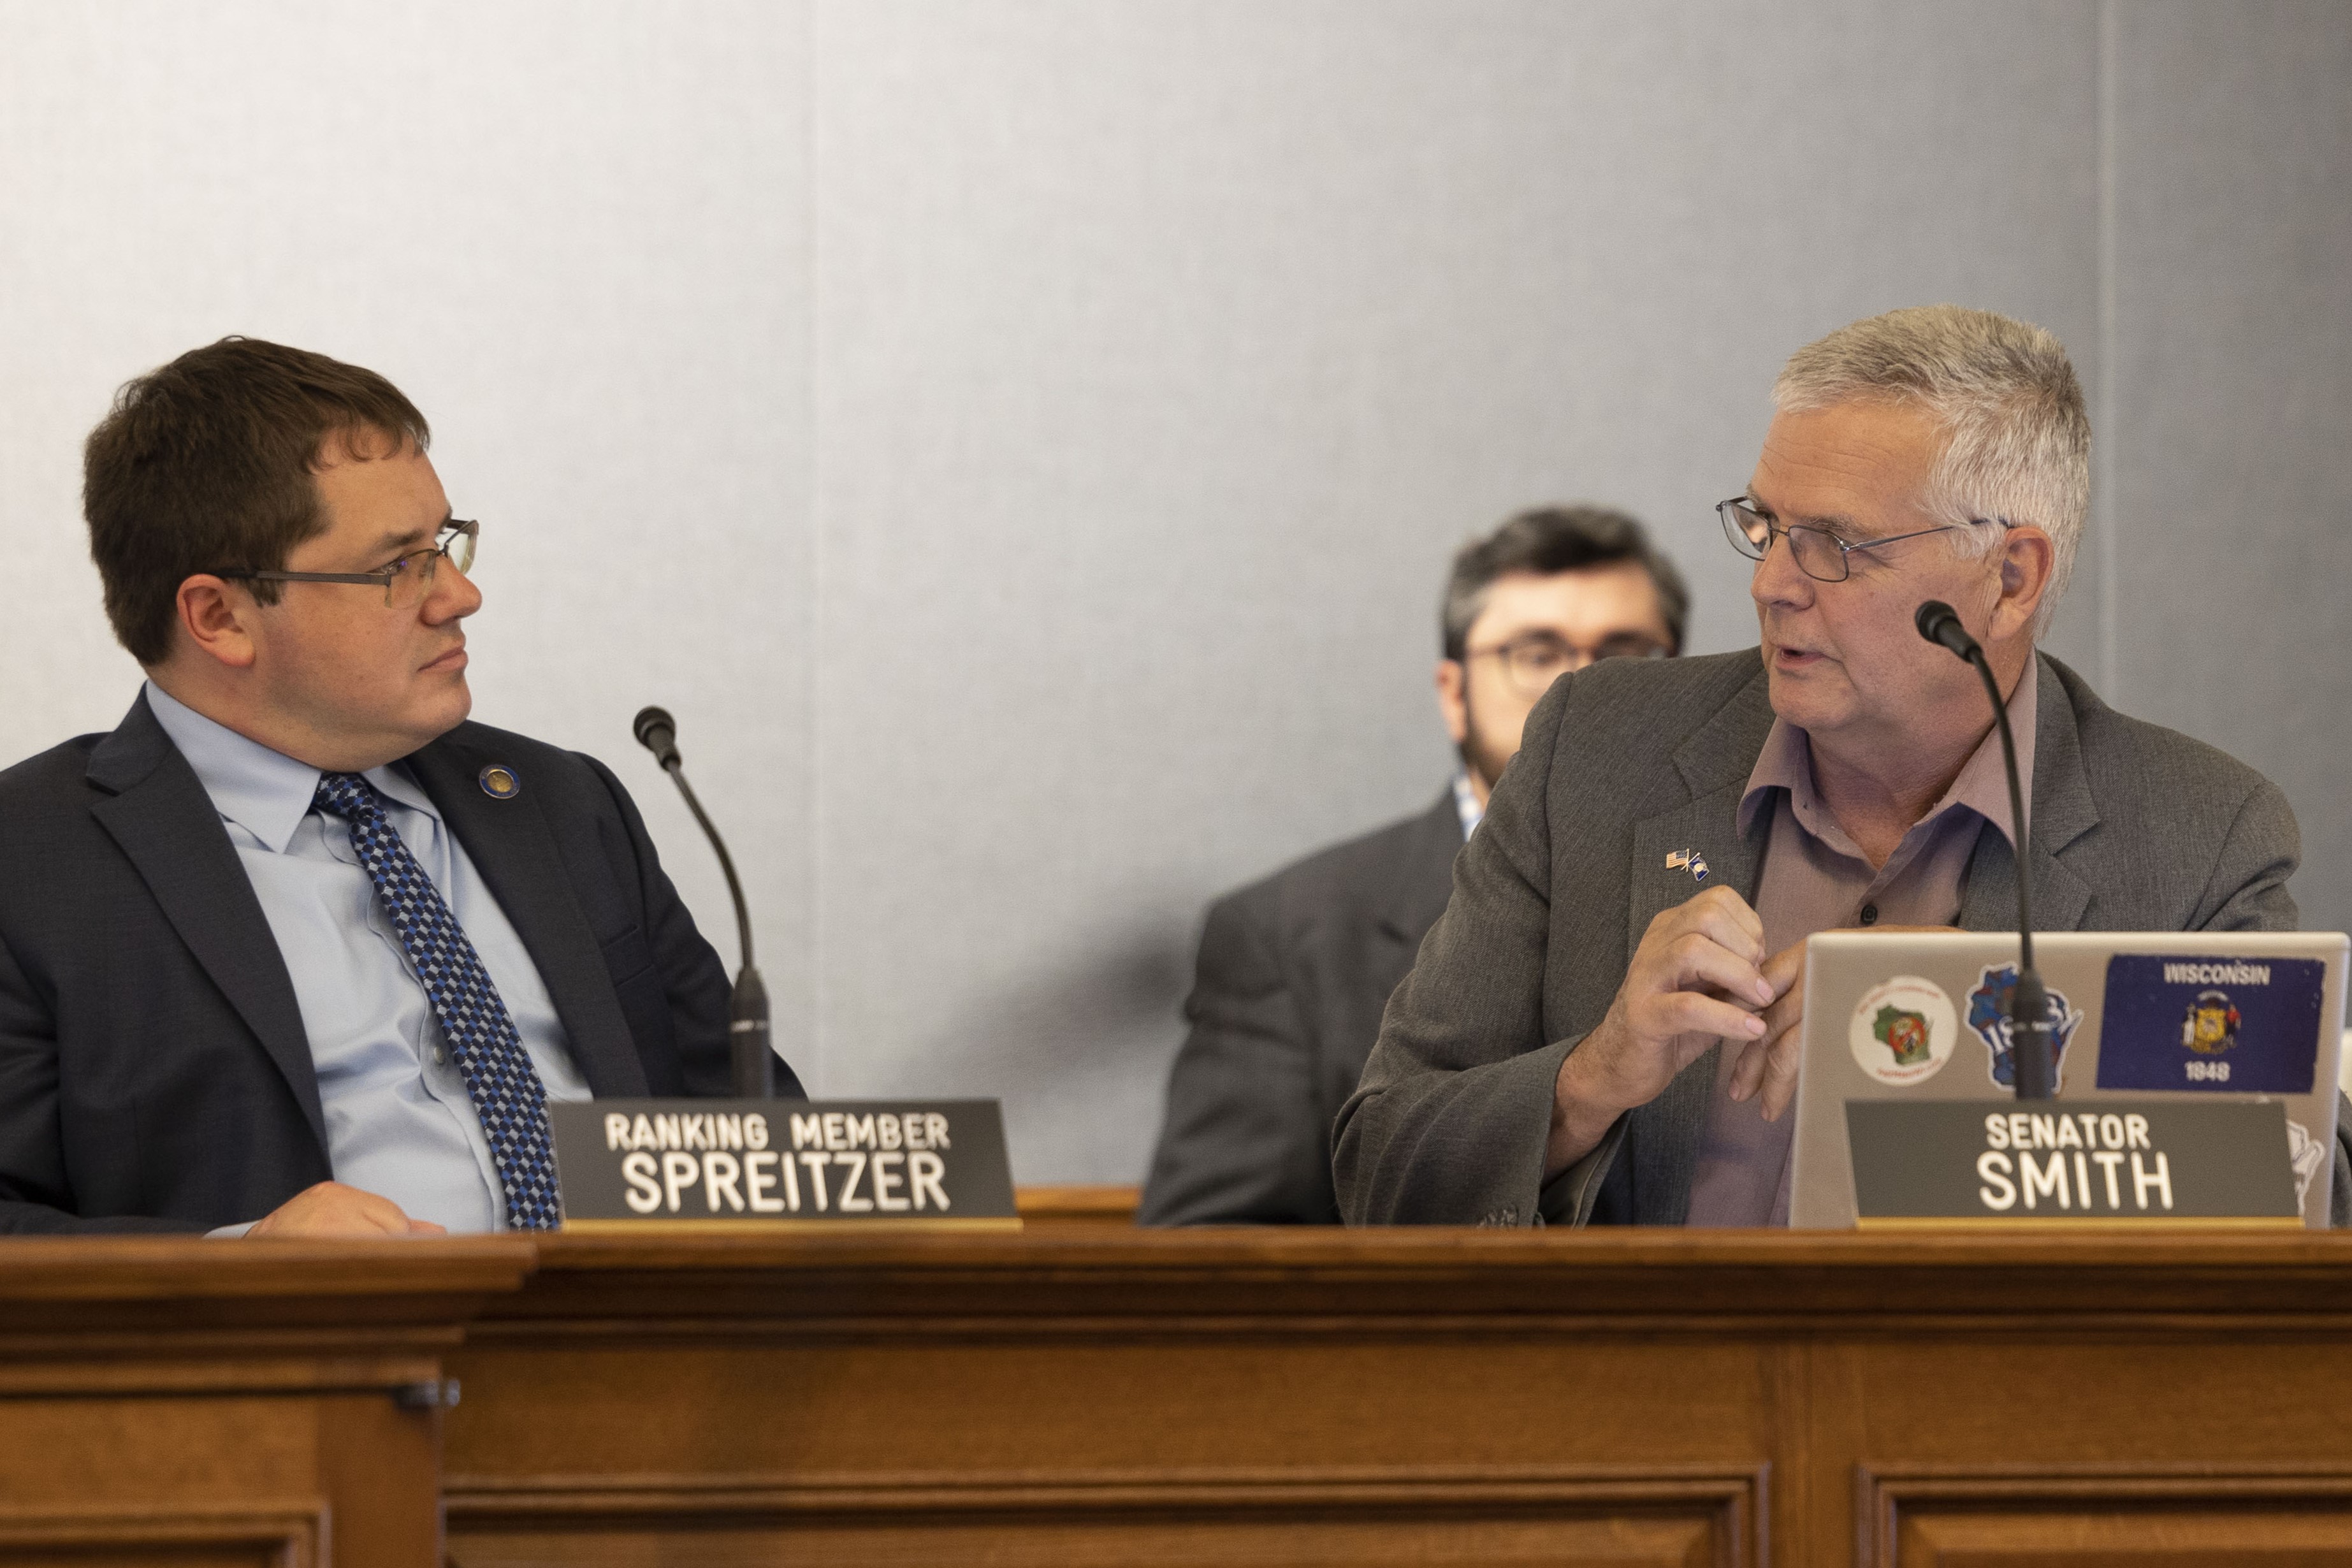 Senator Jeff Smith and Senator Mark Spreitzer speak at a committee hearing for the Senate Committee on Shared Revenue, Elections and Consumer Protection.